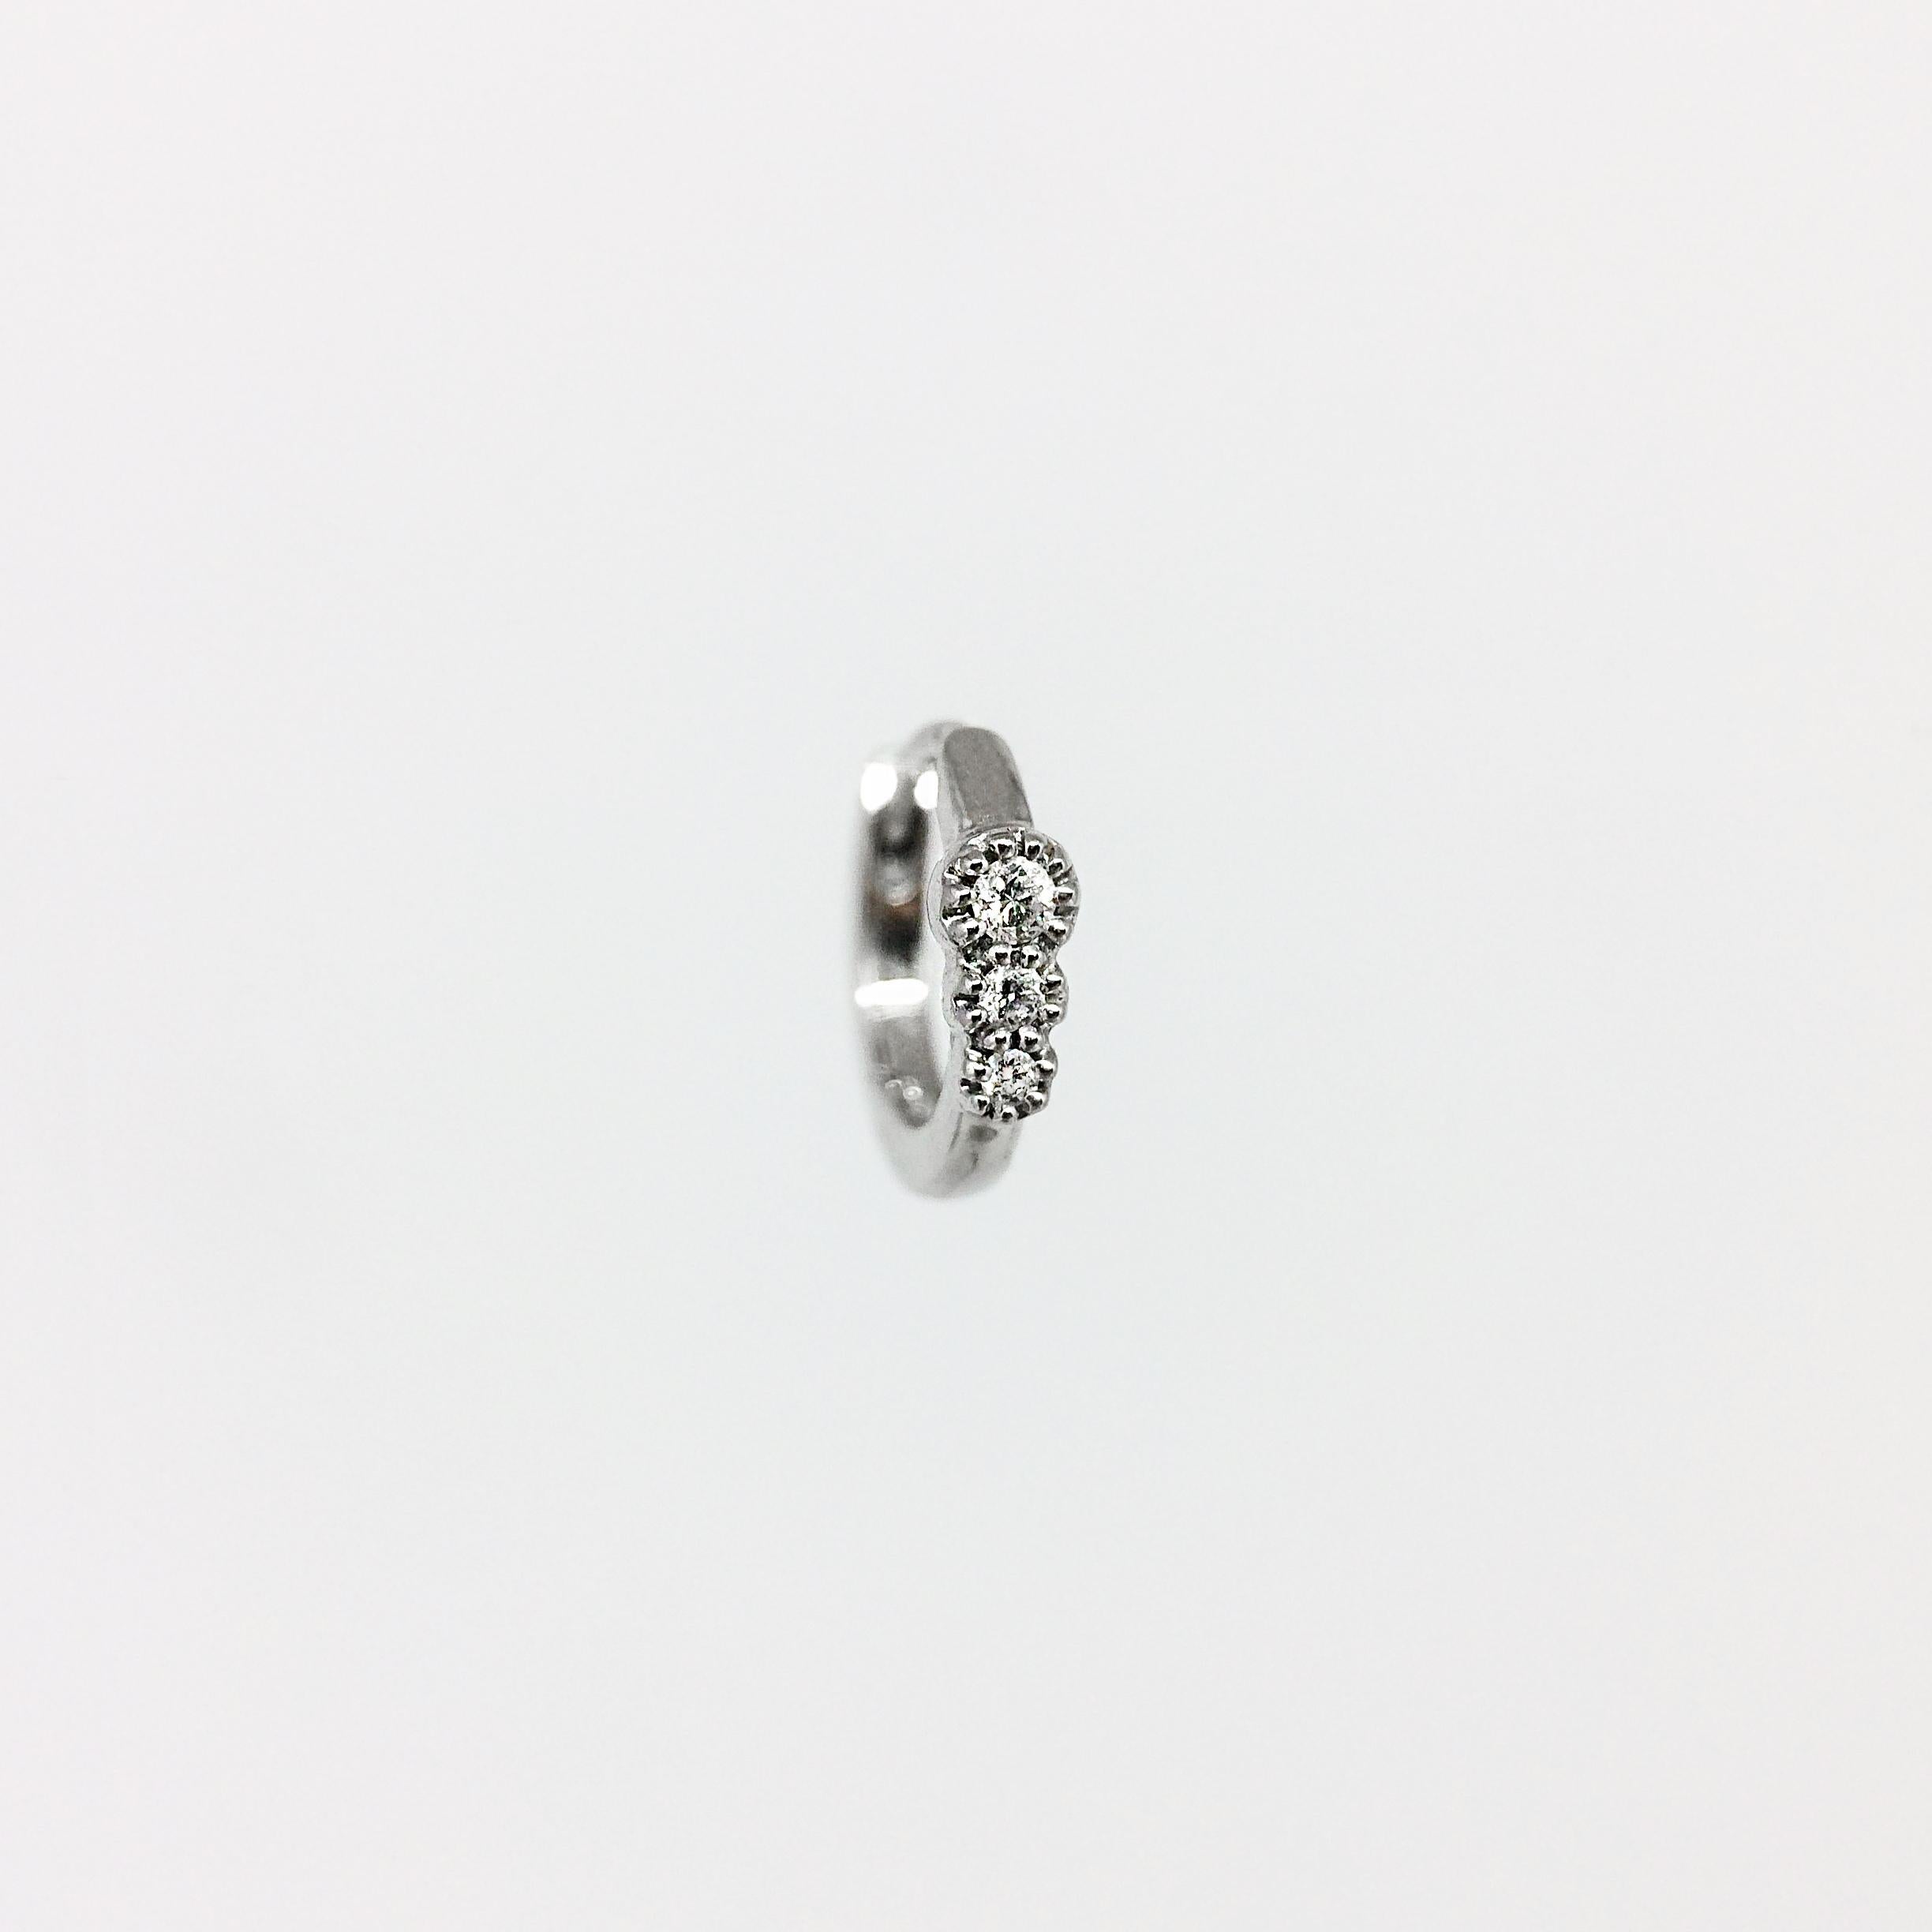 By Stone Paris

Tiny hoop
18-kt white gold 0.65 g
3 GVS white diamonds 0.03 ct
Inner diameter : 0.65 cm - Sold singly

This piece is unavailable, it has to be especially handmade with an 8 to 10 weeks lead time. 
All products made to order cannot be